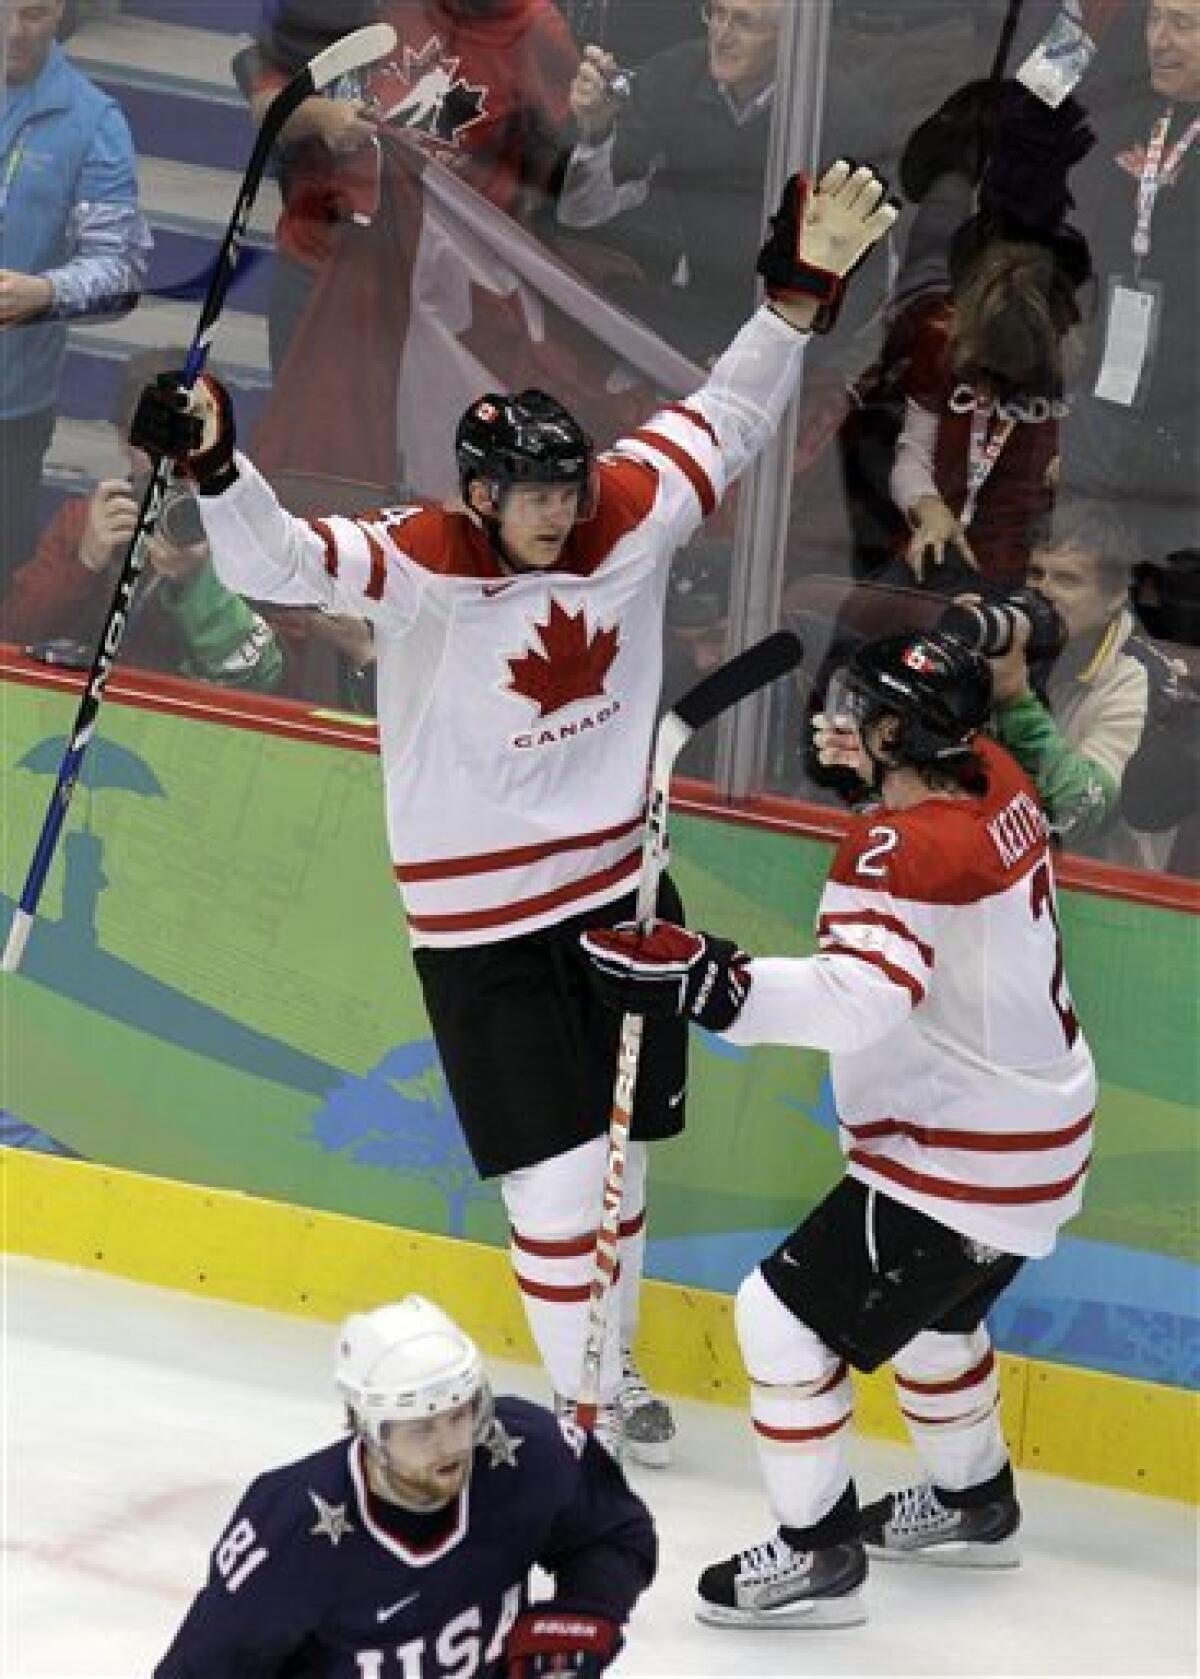 Team Canada captain Scott Niedermayer skates with the flag after